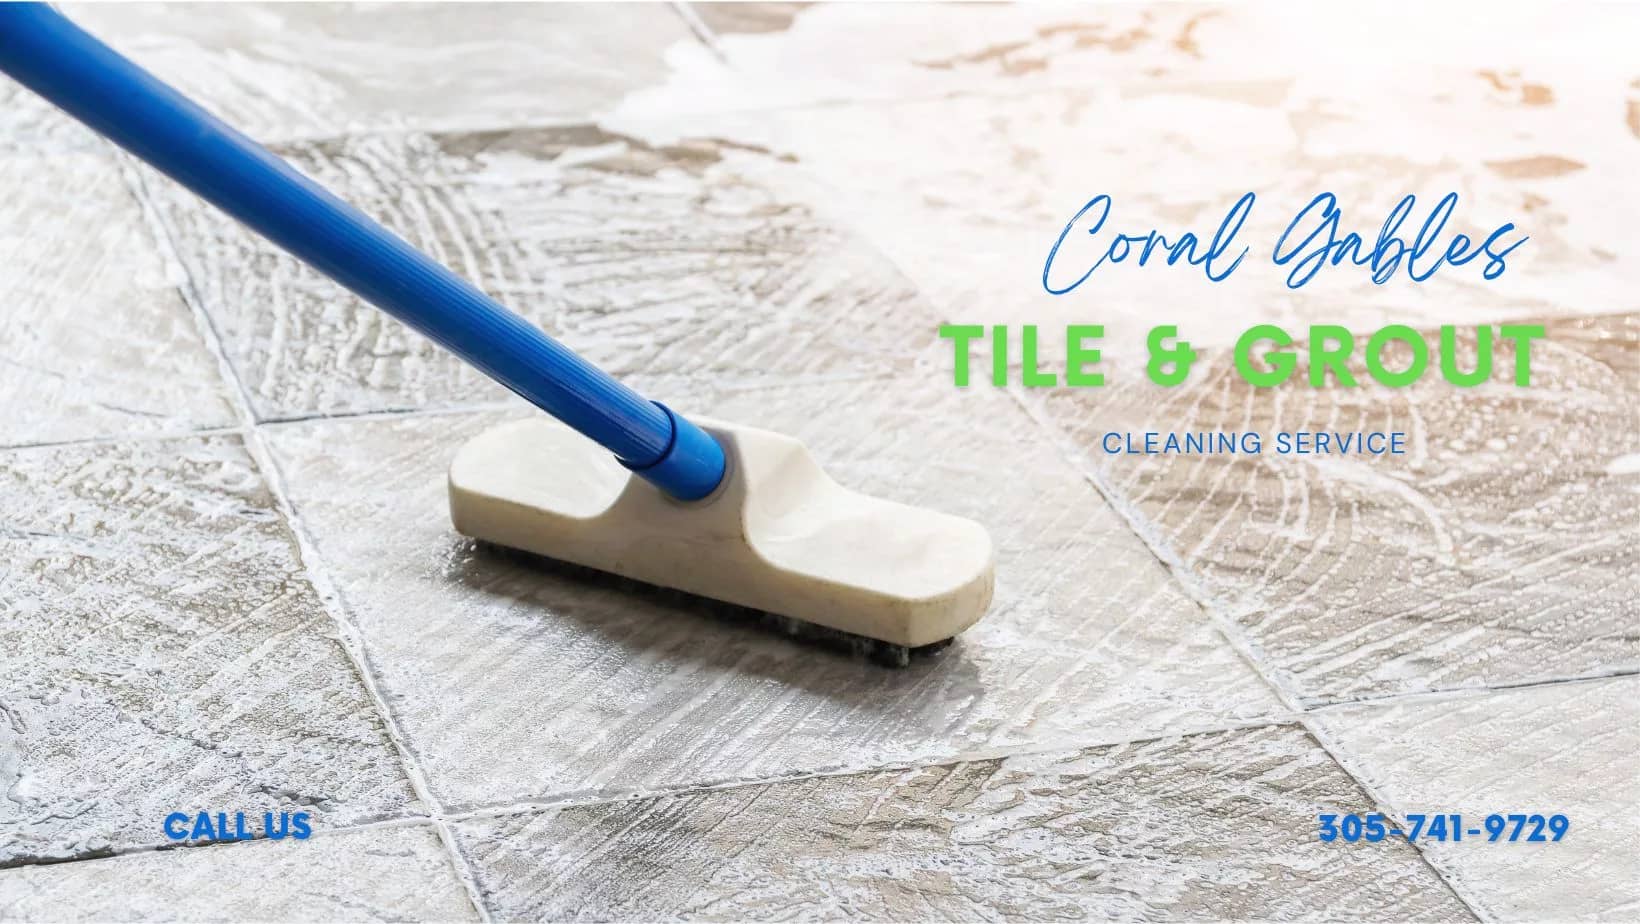 Keep It Clean Carpets and Tile Cleaning Video